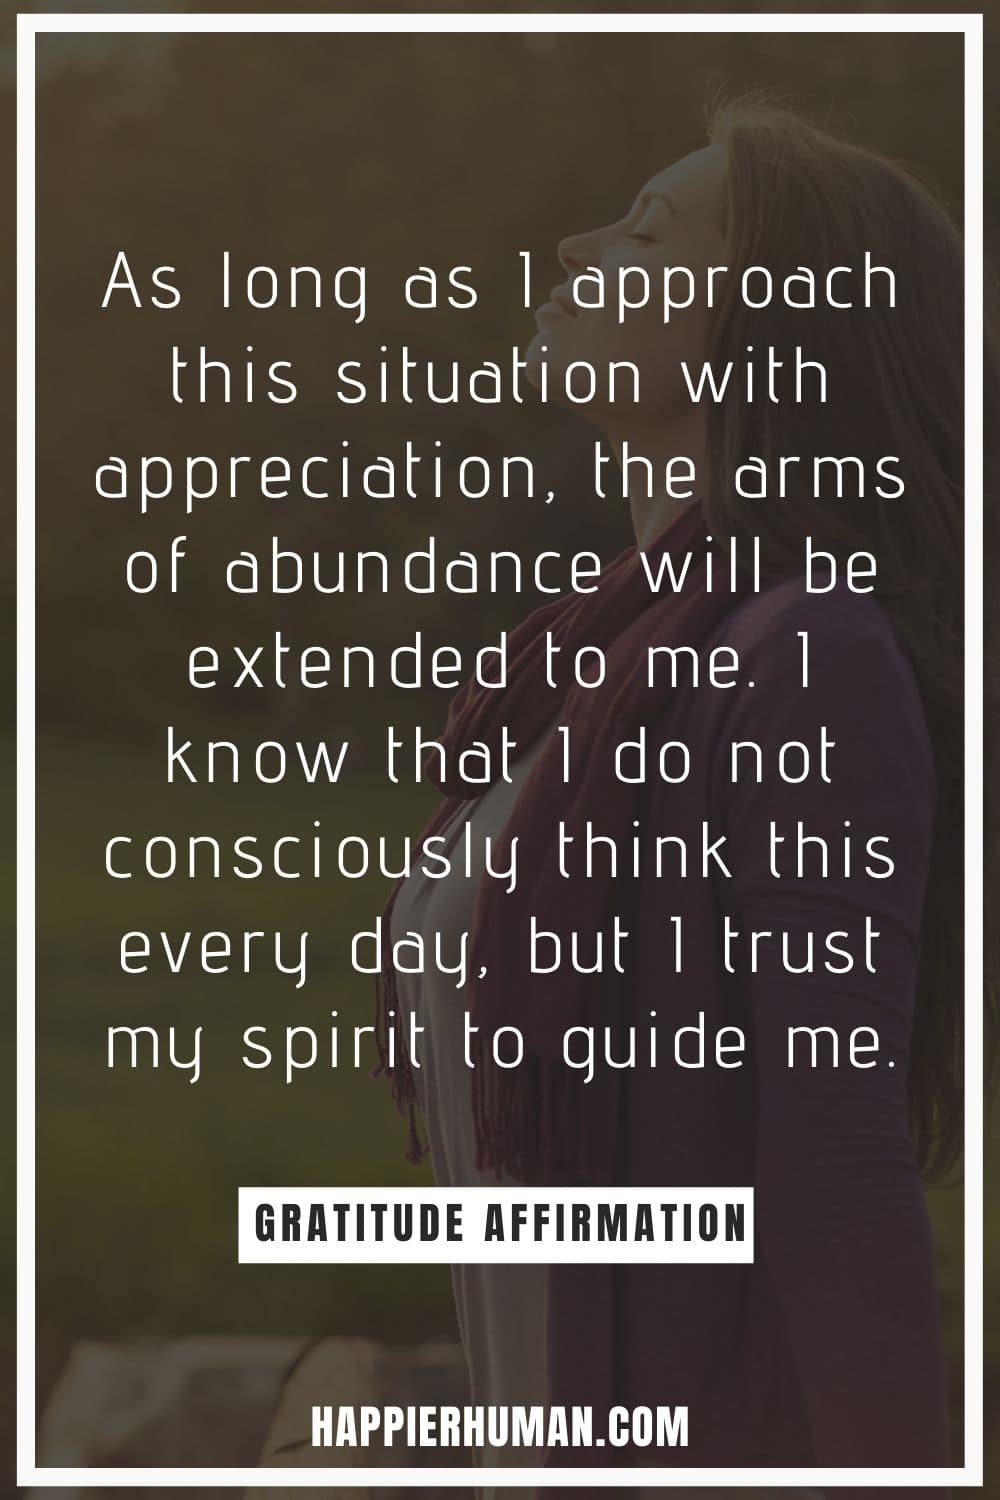 Gratitude Affirmations - As long as I approach this situation with appreciation, the arms of abundance will be extended to me. I know that I do not consciously think this every day, but I trust my spirit to guide me. | morning gratitude affirmations | gratitude affirmations sleep | happy and grateful affirmations #affirmations #affirmationsoftheday #affirmationswork